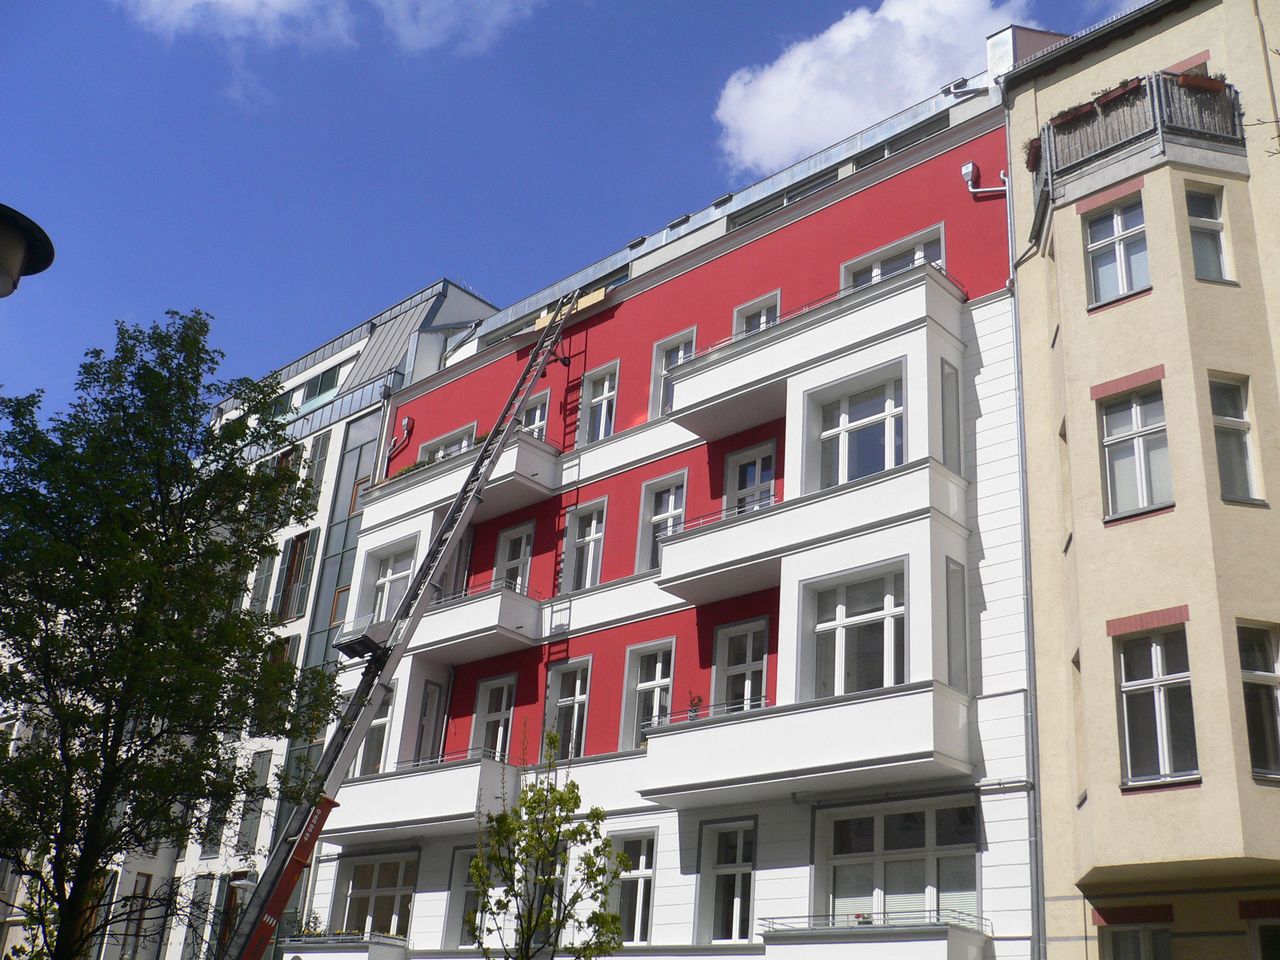 Stylish and cozy apartment in Mitte, near Friedrichstrasse